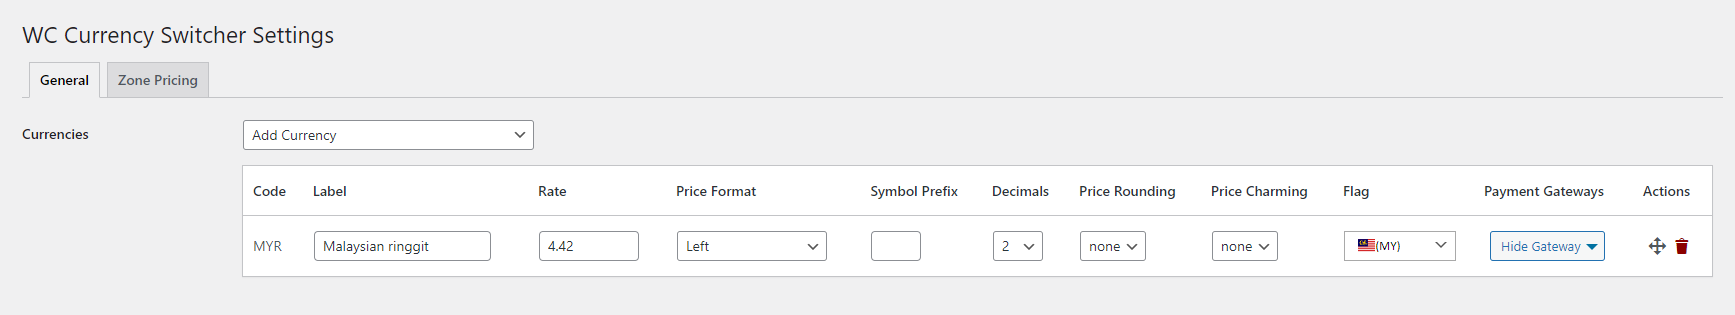 wcc-currency-switcher-settings